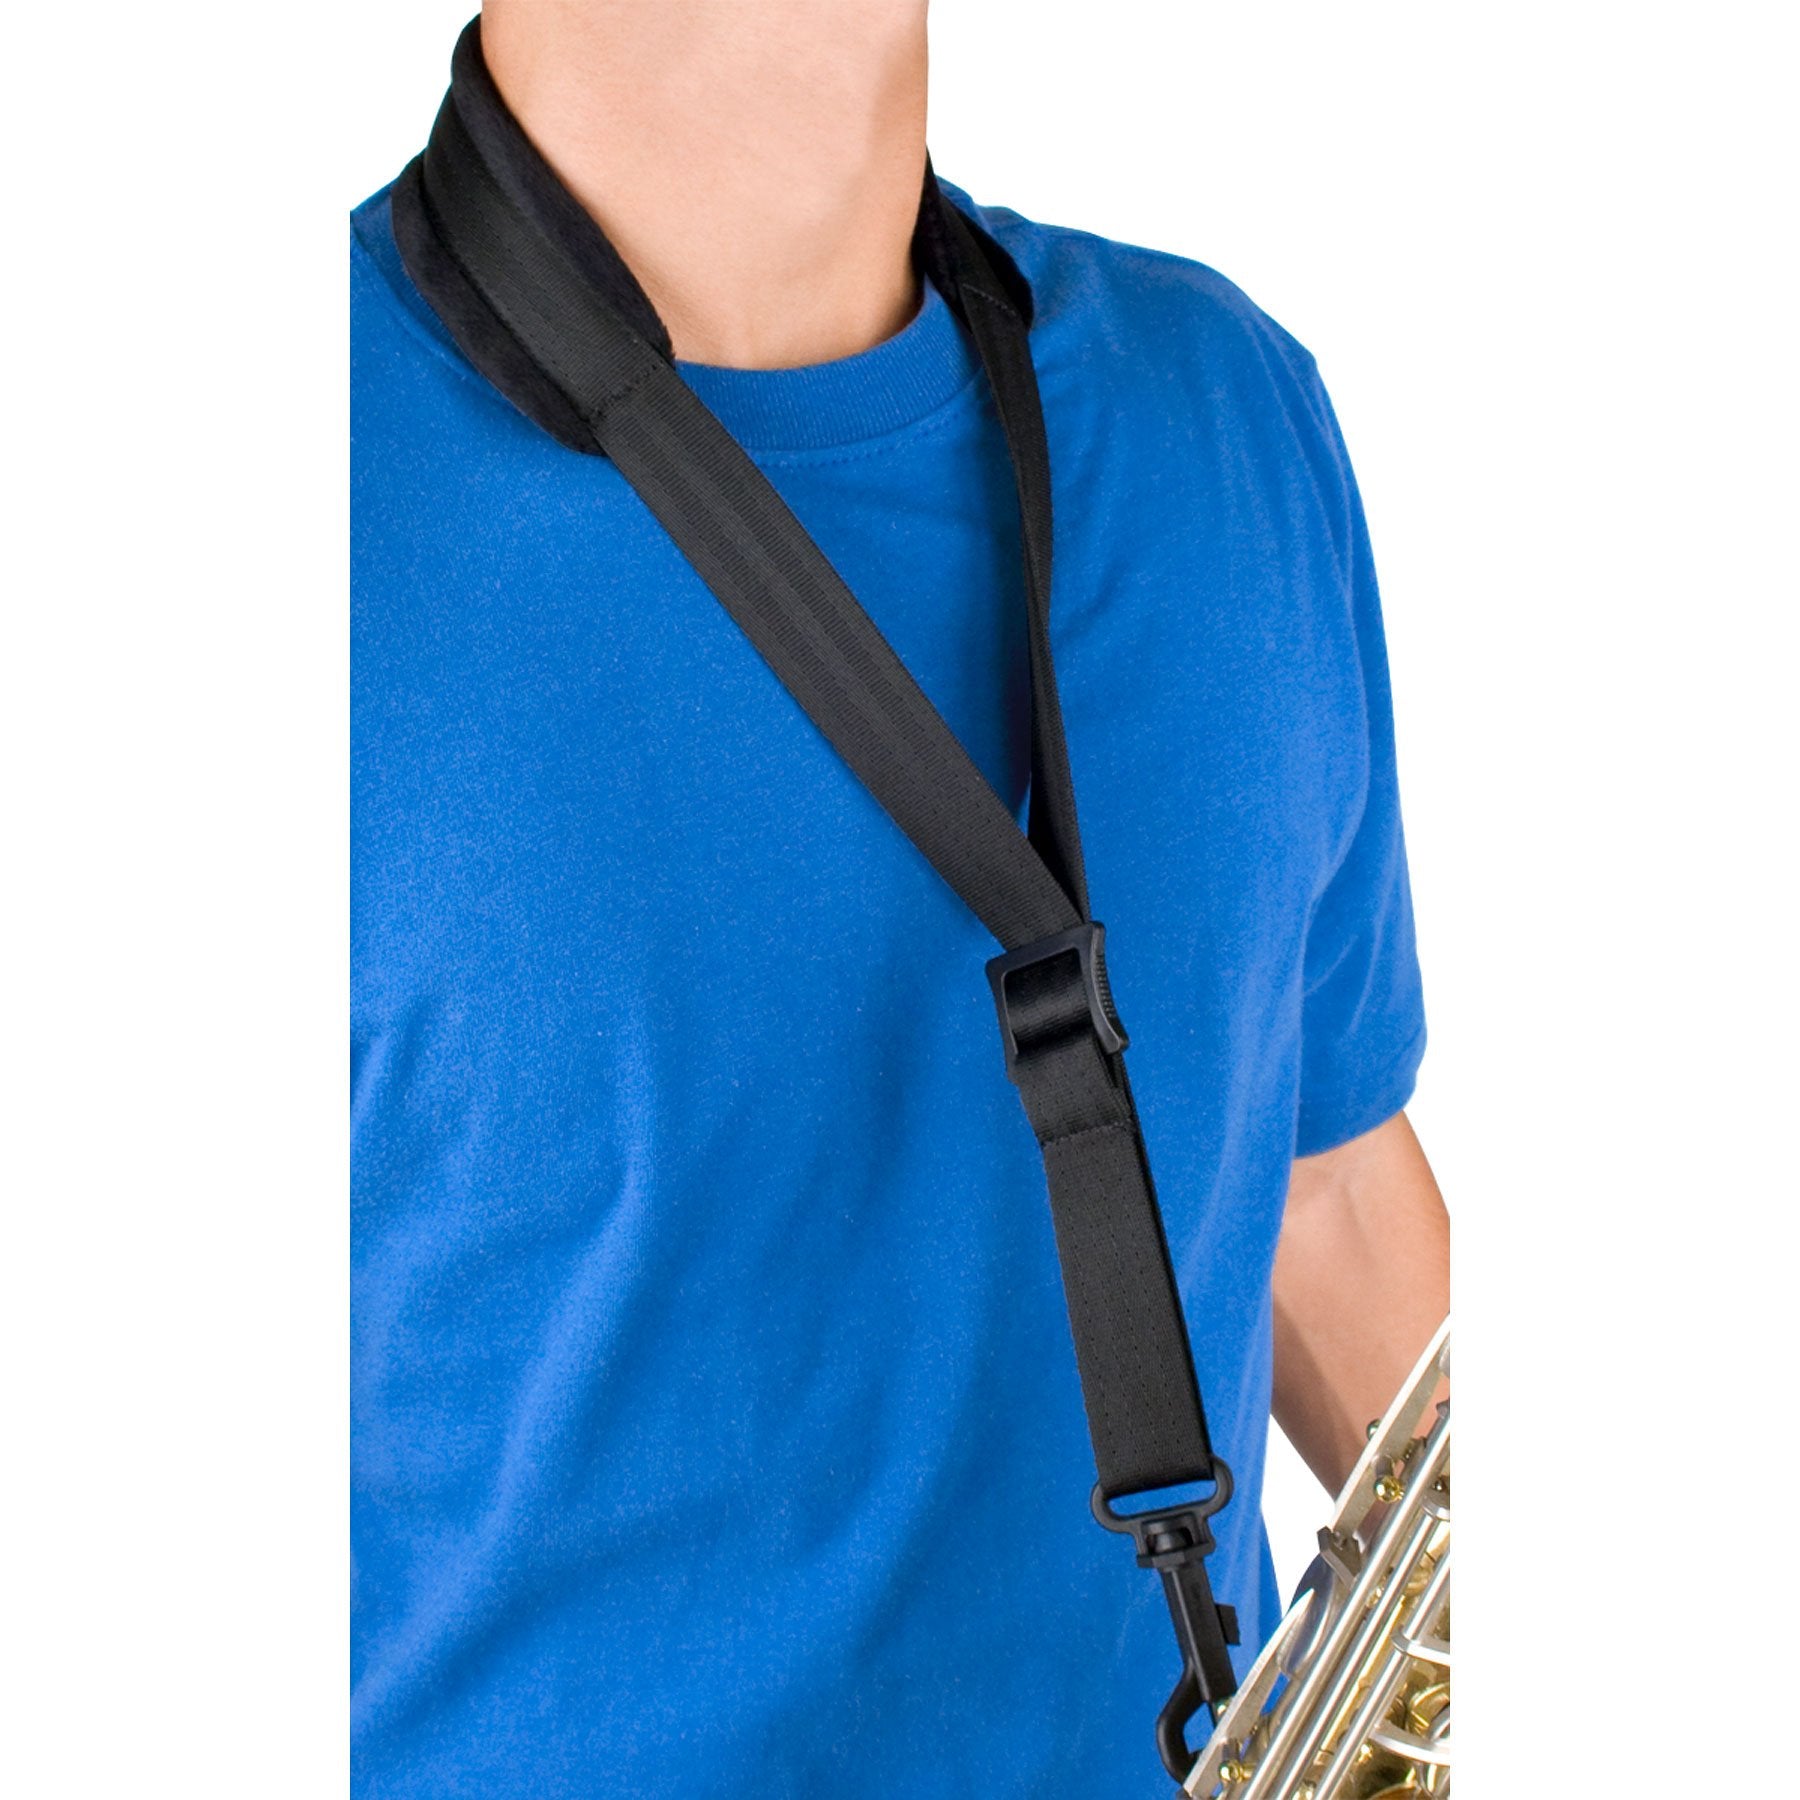 Protec - Saxophone Neck Strap Featuring Velour Neck Pad and Plastic Swivel Snap-Accessories-Protec-Music Elements